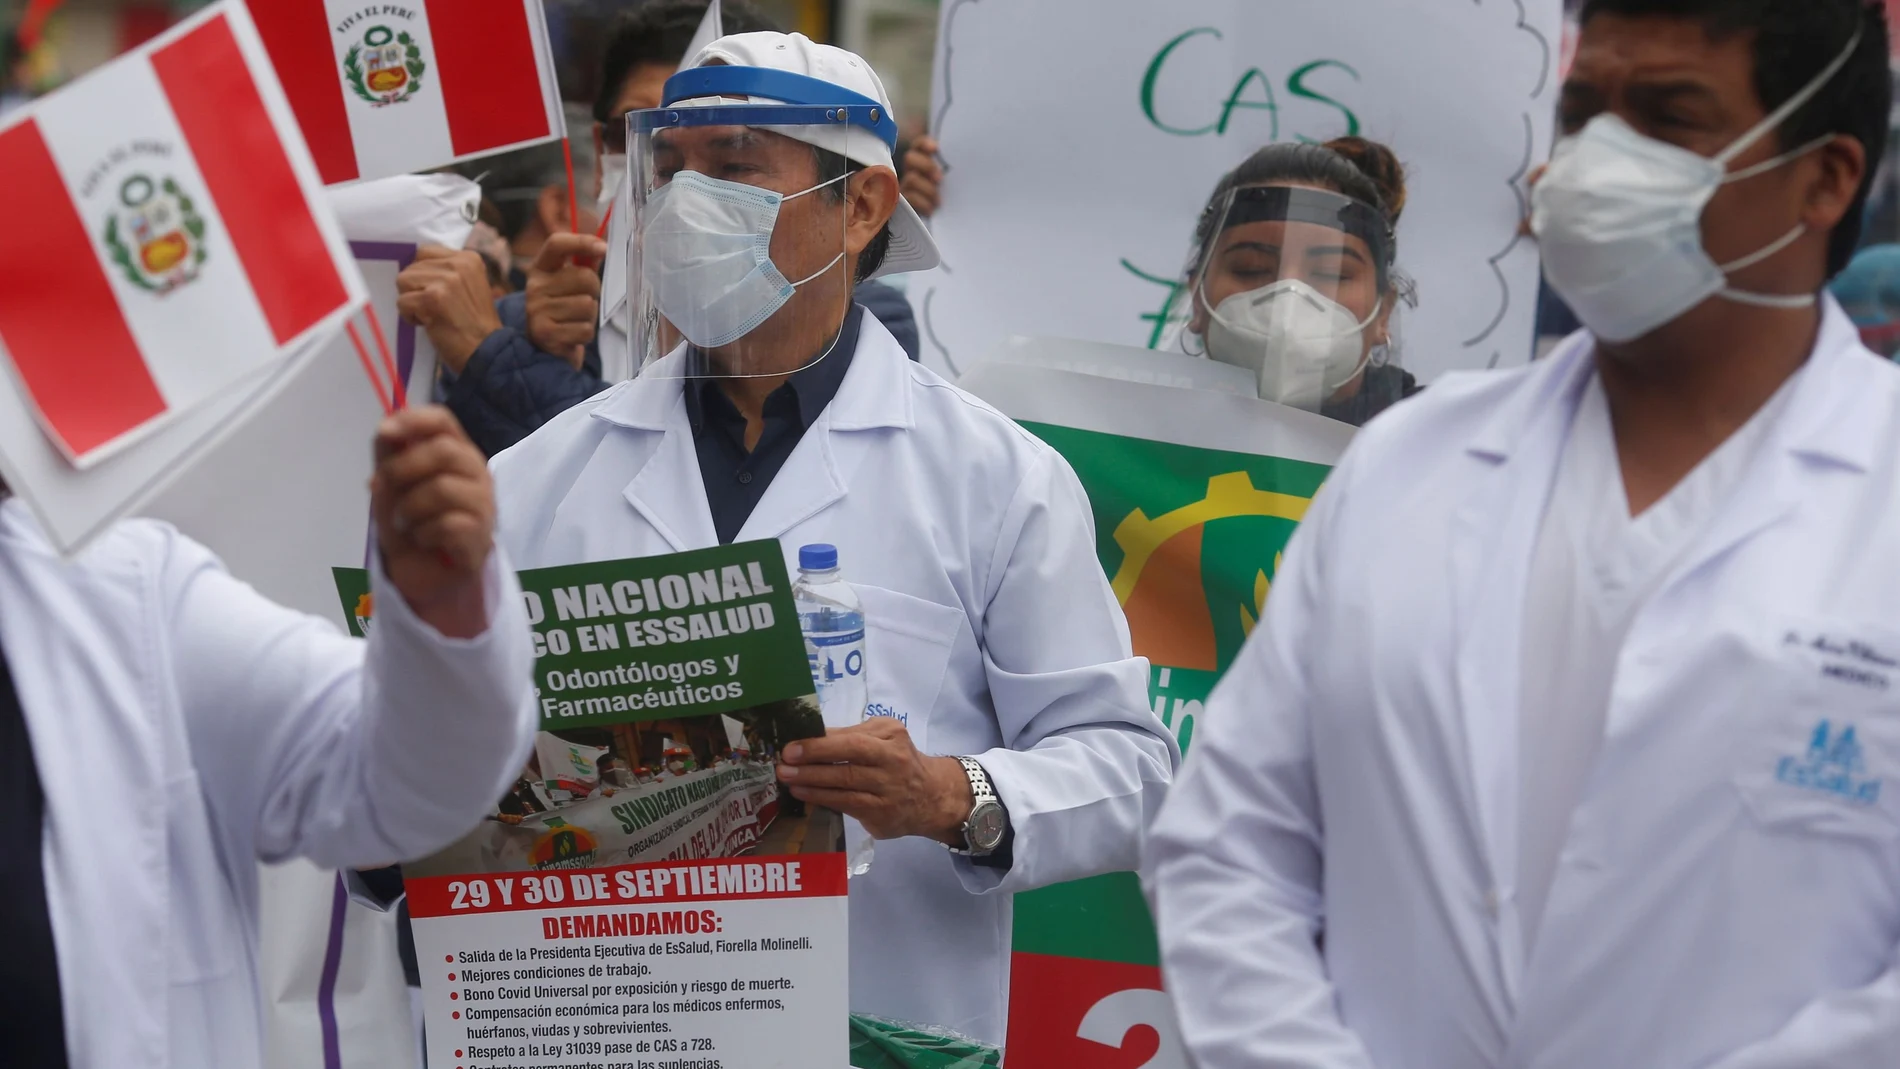 Health workers demand better working conditions and greater access to personal protective gear when treating patients suffering from the coronavirus disease (COVID-19) during a national strike, in Lima, Peru September 29, 2020. REUTERS/Sebastian Castaneda NO RESALES. NO ARCHIVES